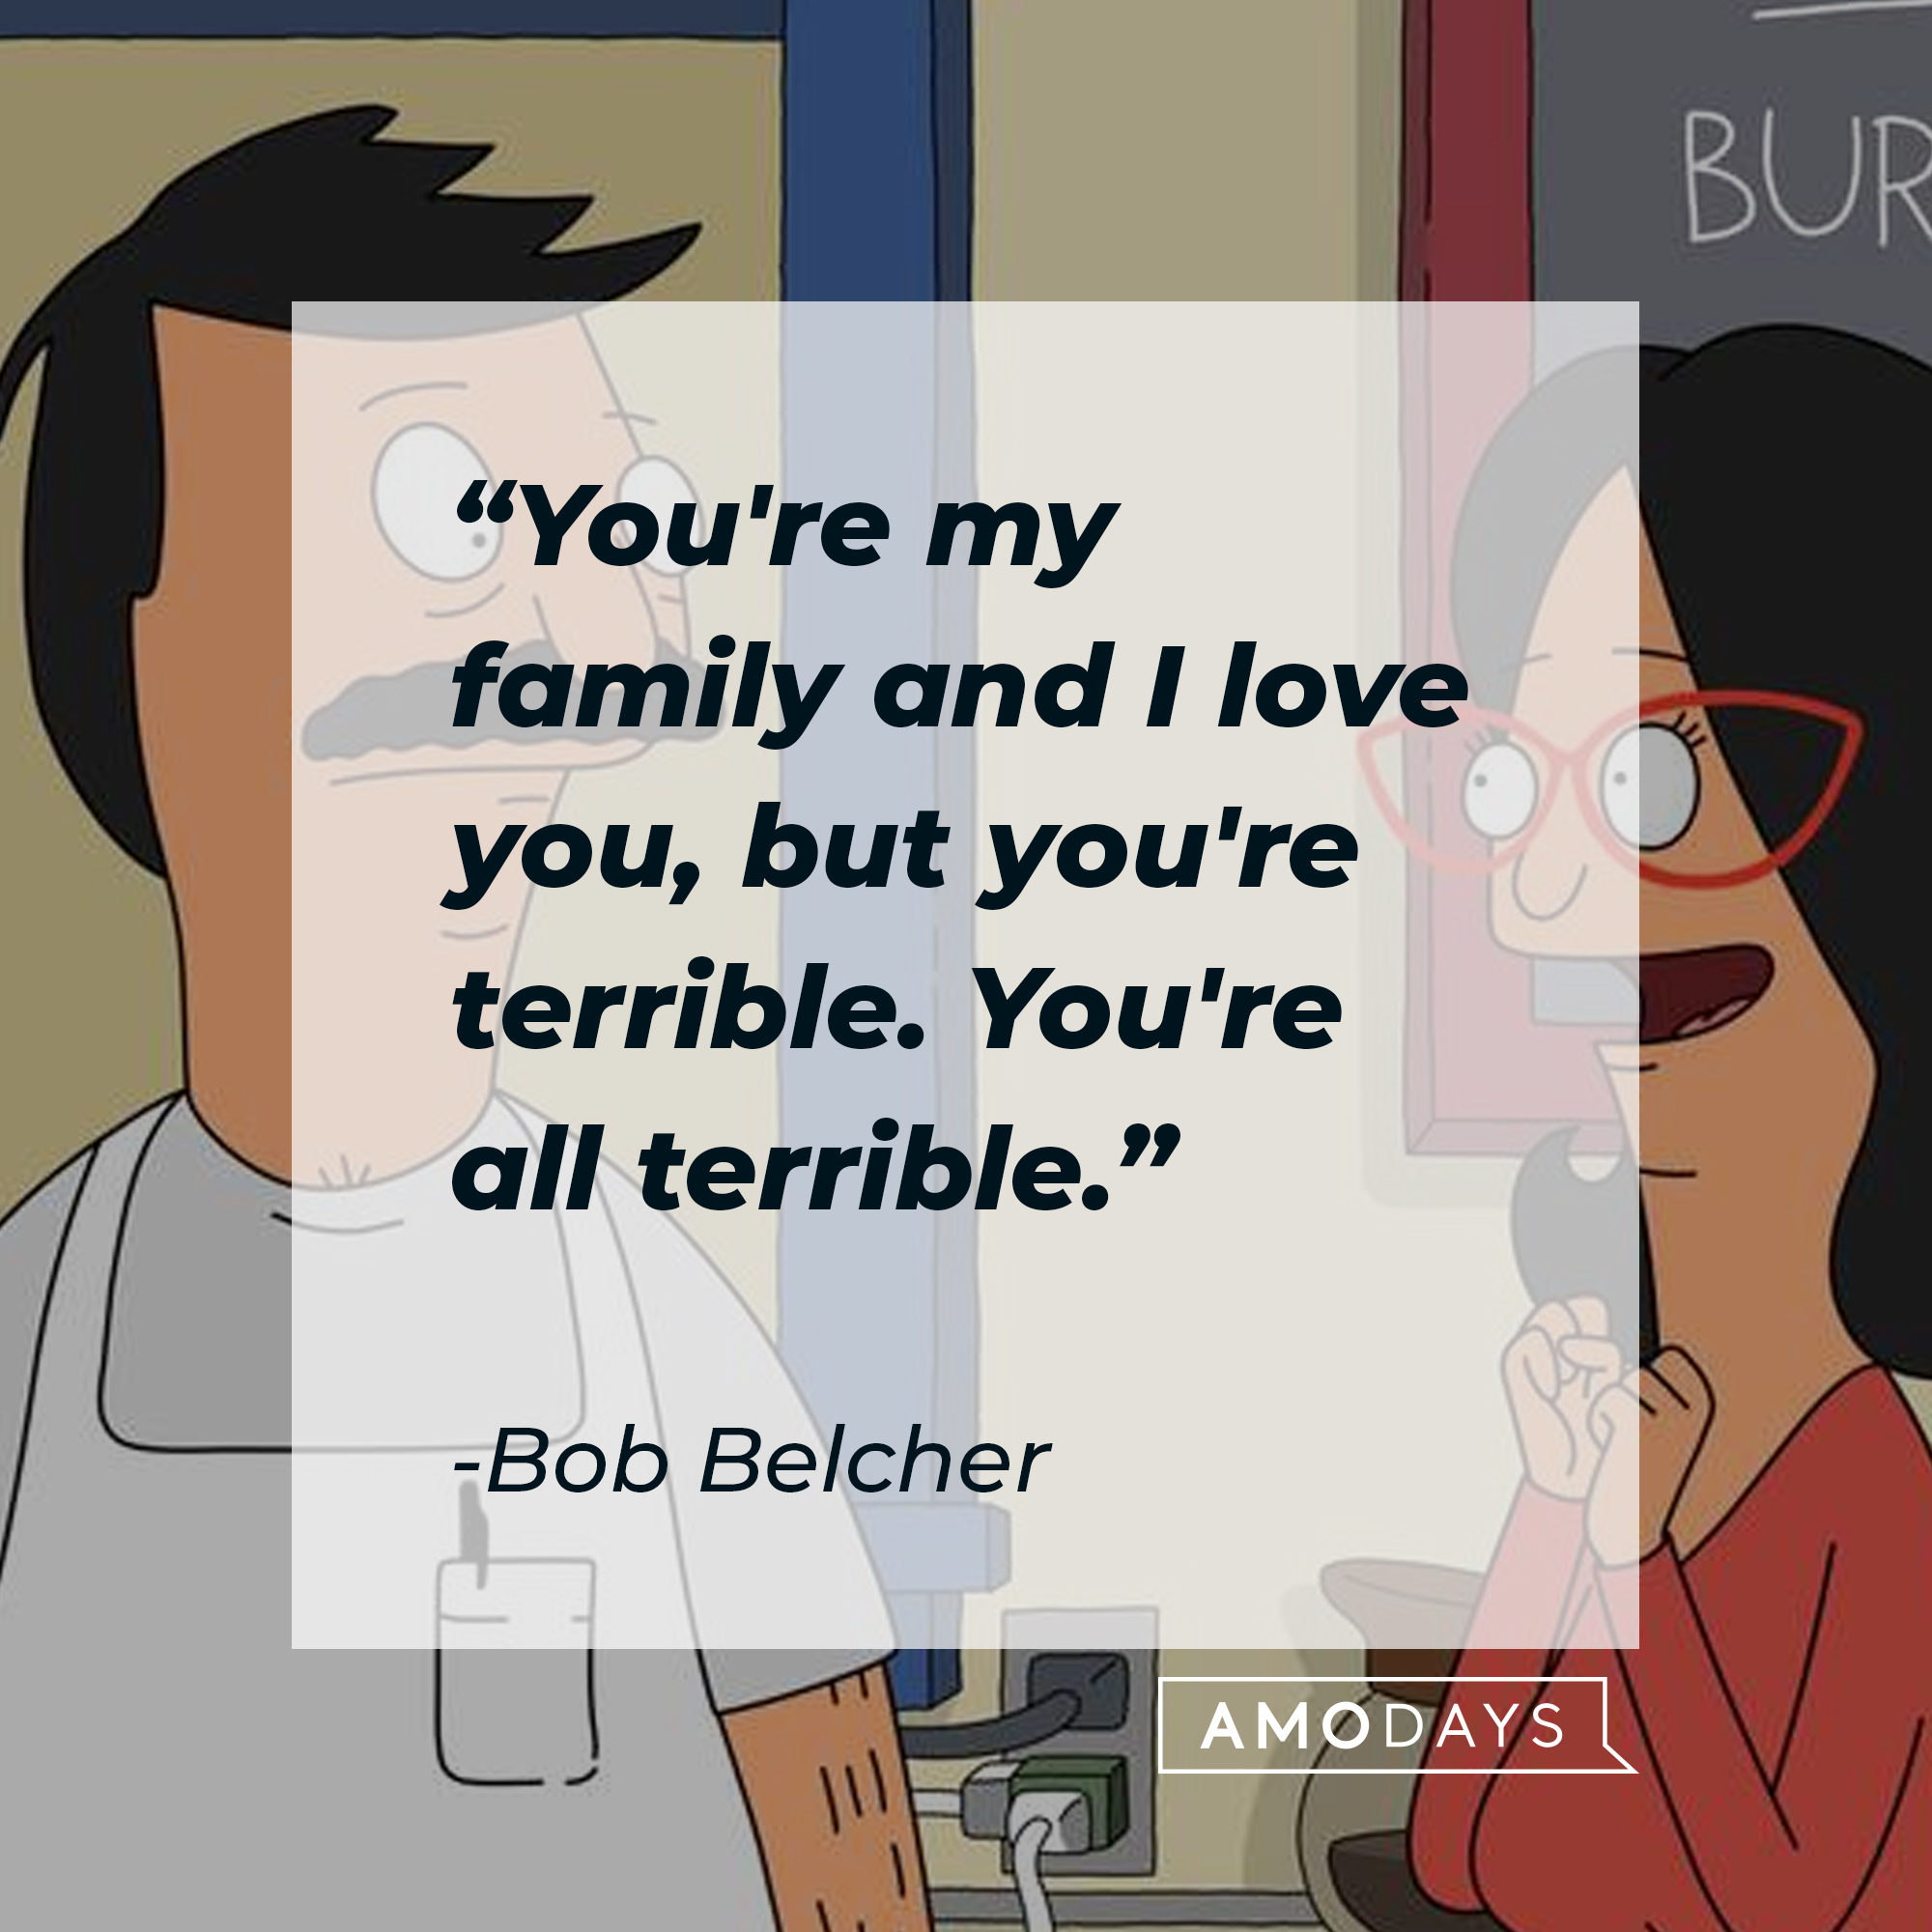 Bob and Linda Belcher, with Bob’s quote: "You're my family and I love you, but you're terrible. You're all terrible." | Source: Facebook.com/BobsBurgers